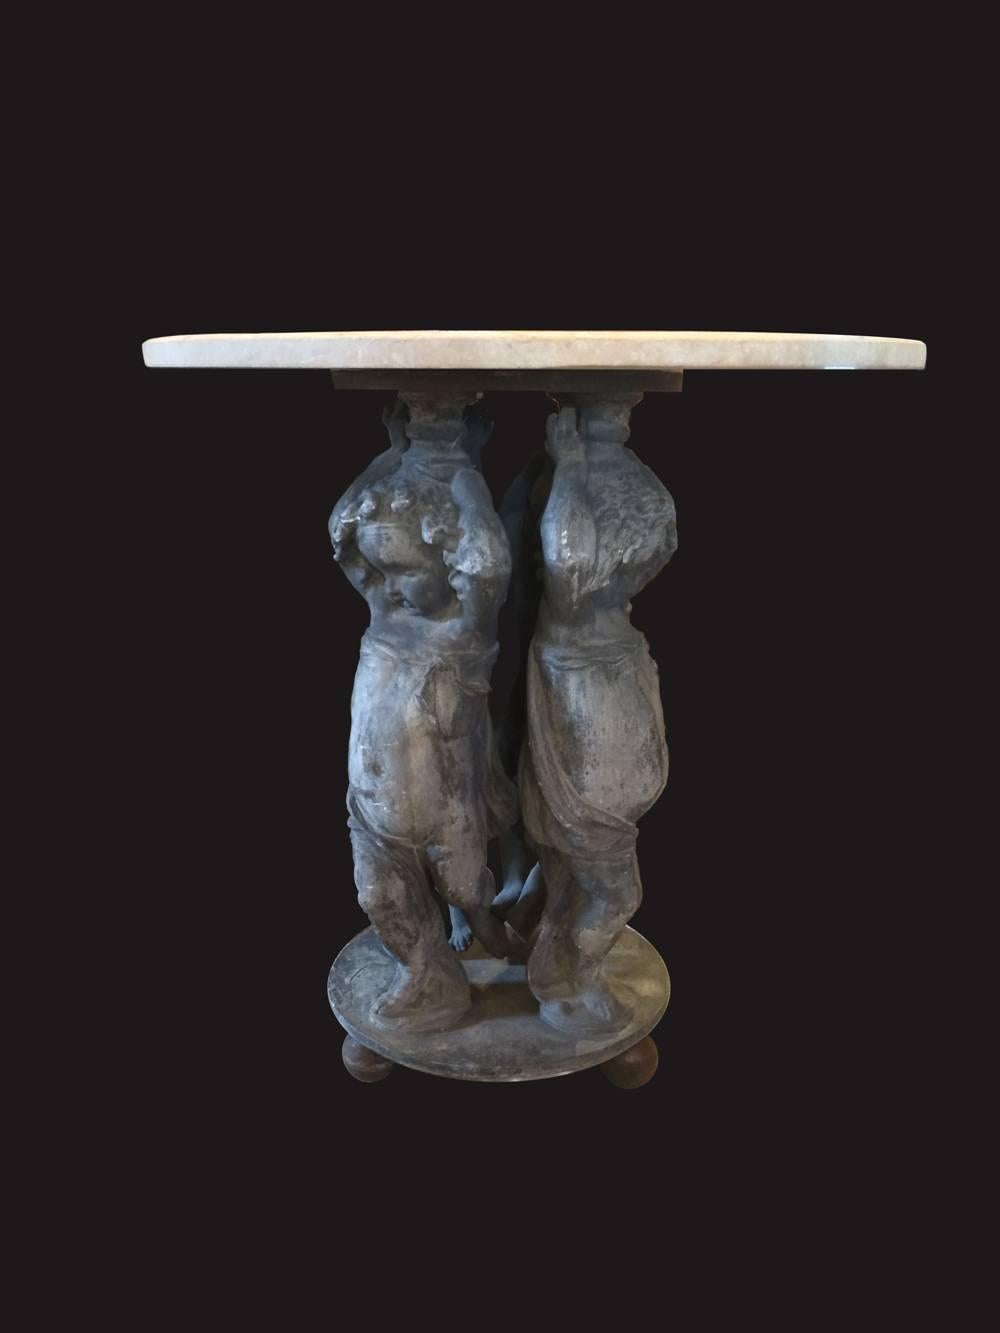 A fabulous and unique antique marble top garden table.  It is supported by four lead cherub figures with outstretched arms. The top has a wonderfully aged patina. It is one of the most unusual and rare tables we have ever offered.  Circa 1880.